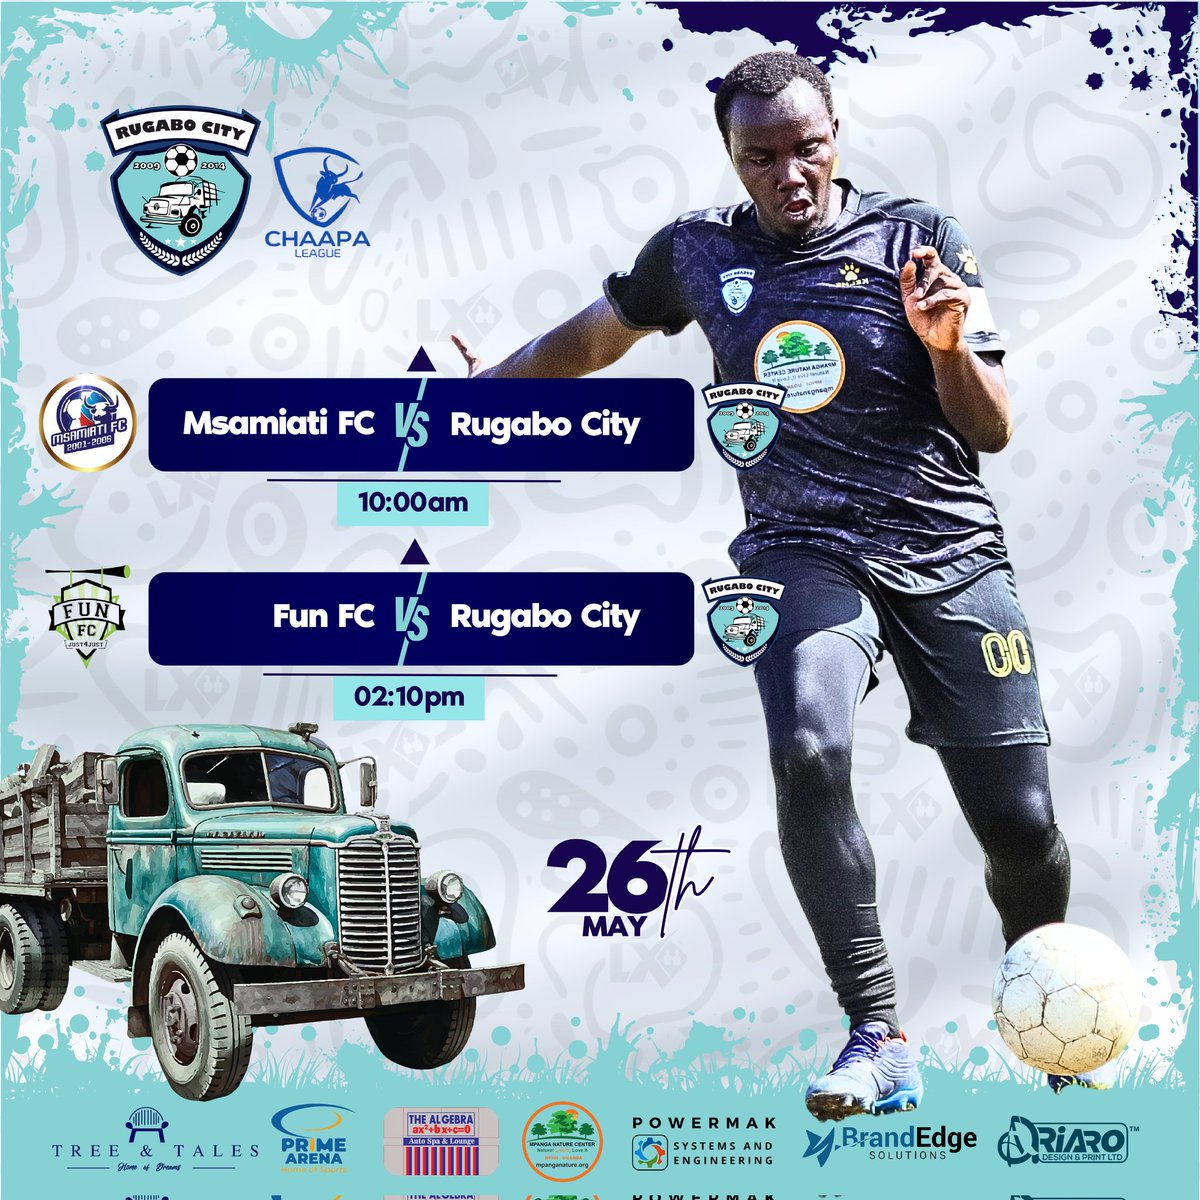 Get ready for a thrilling Sunday with back to back action against @FunFC_Official and @msamiatiFC . Let's turn out in our Rugabo and @ChaapaLeague colours to cheer the turn boys! #cityzens #Chaapaleague9